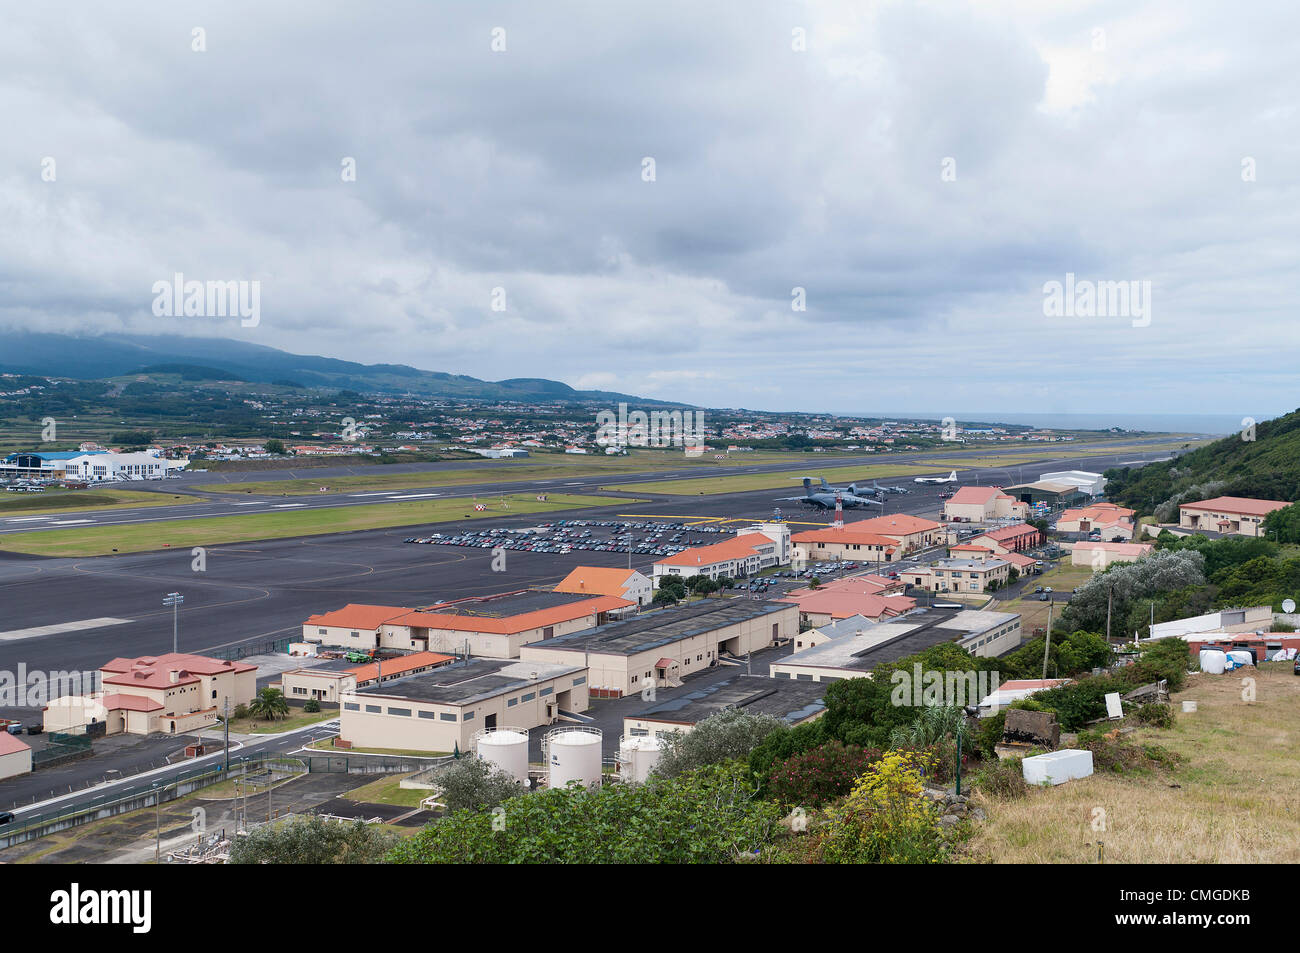 Yesterday members of the 65th Air Base Wing supported an Open House event  hosted by the Portuguese Air Force partners at Lajes Field. Cooperation and  solidarity with the Portuguese and U.S Air